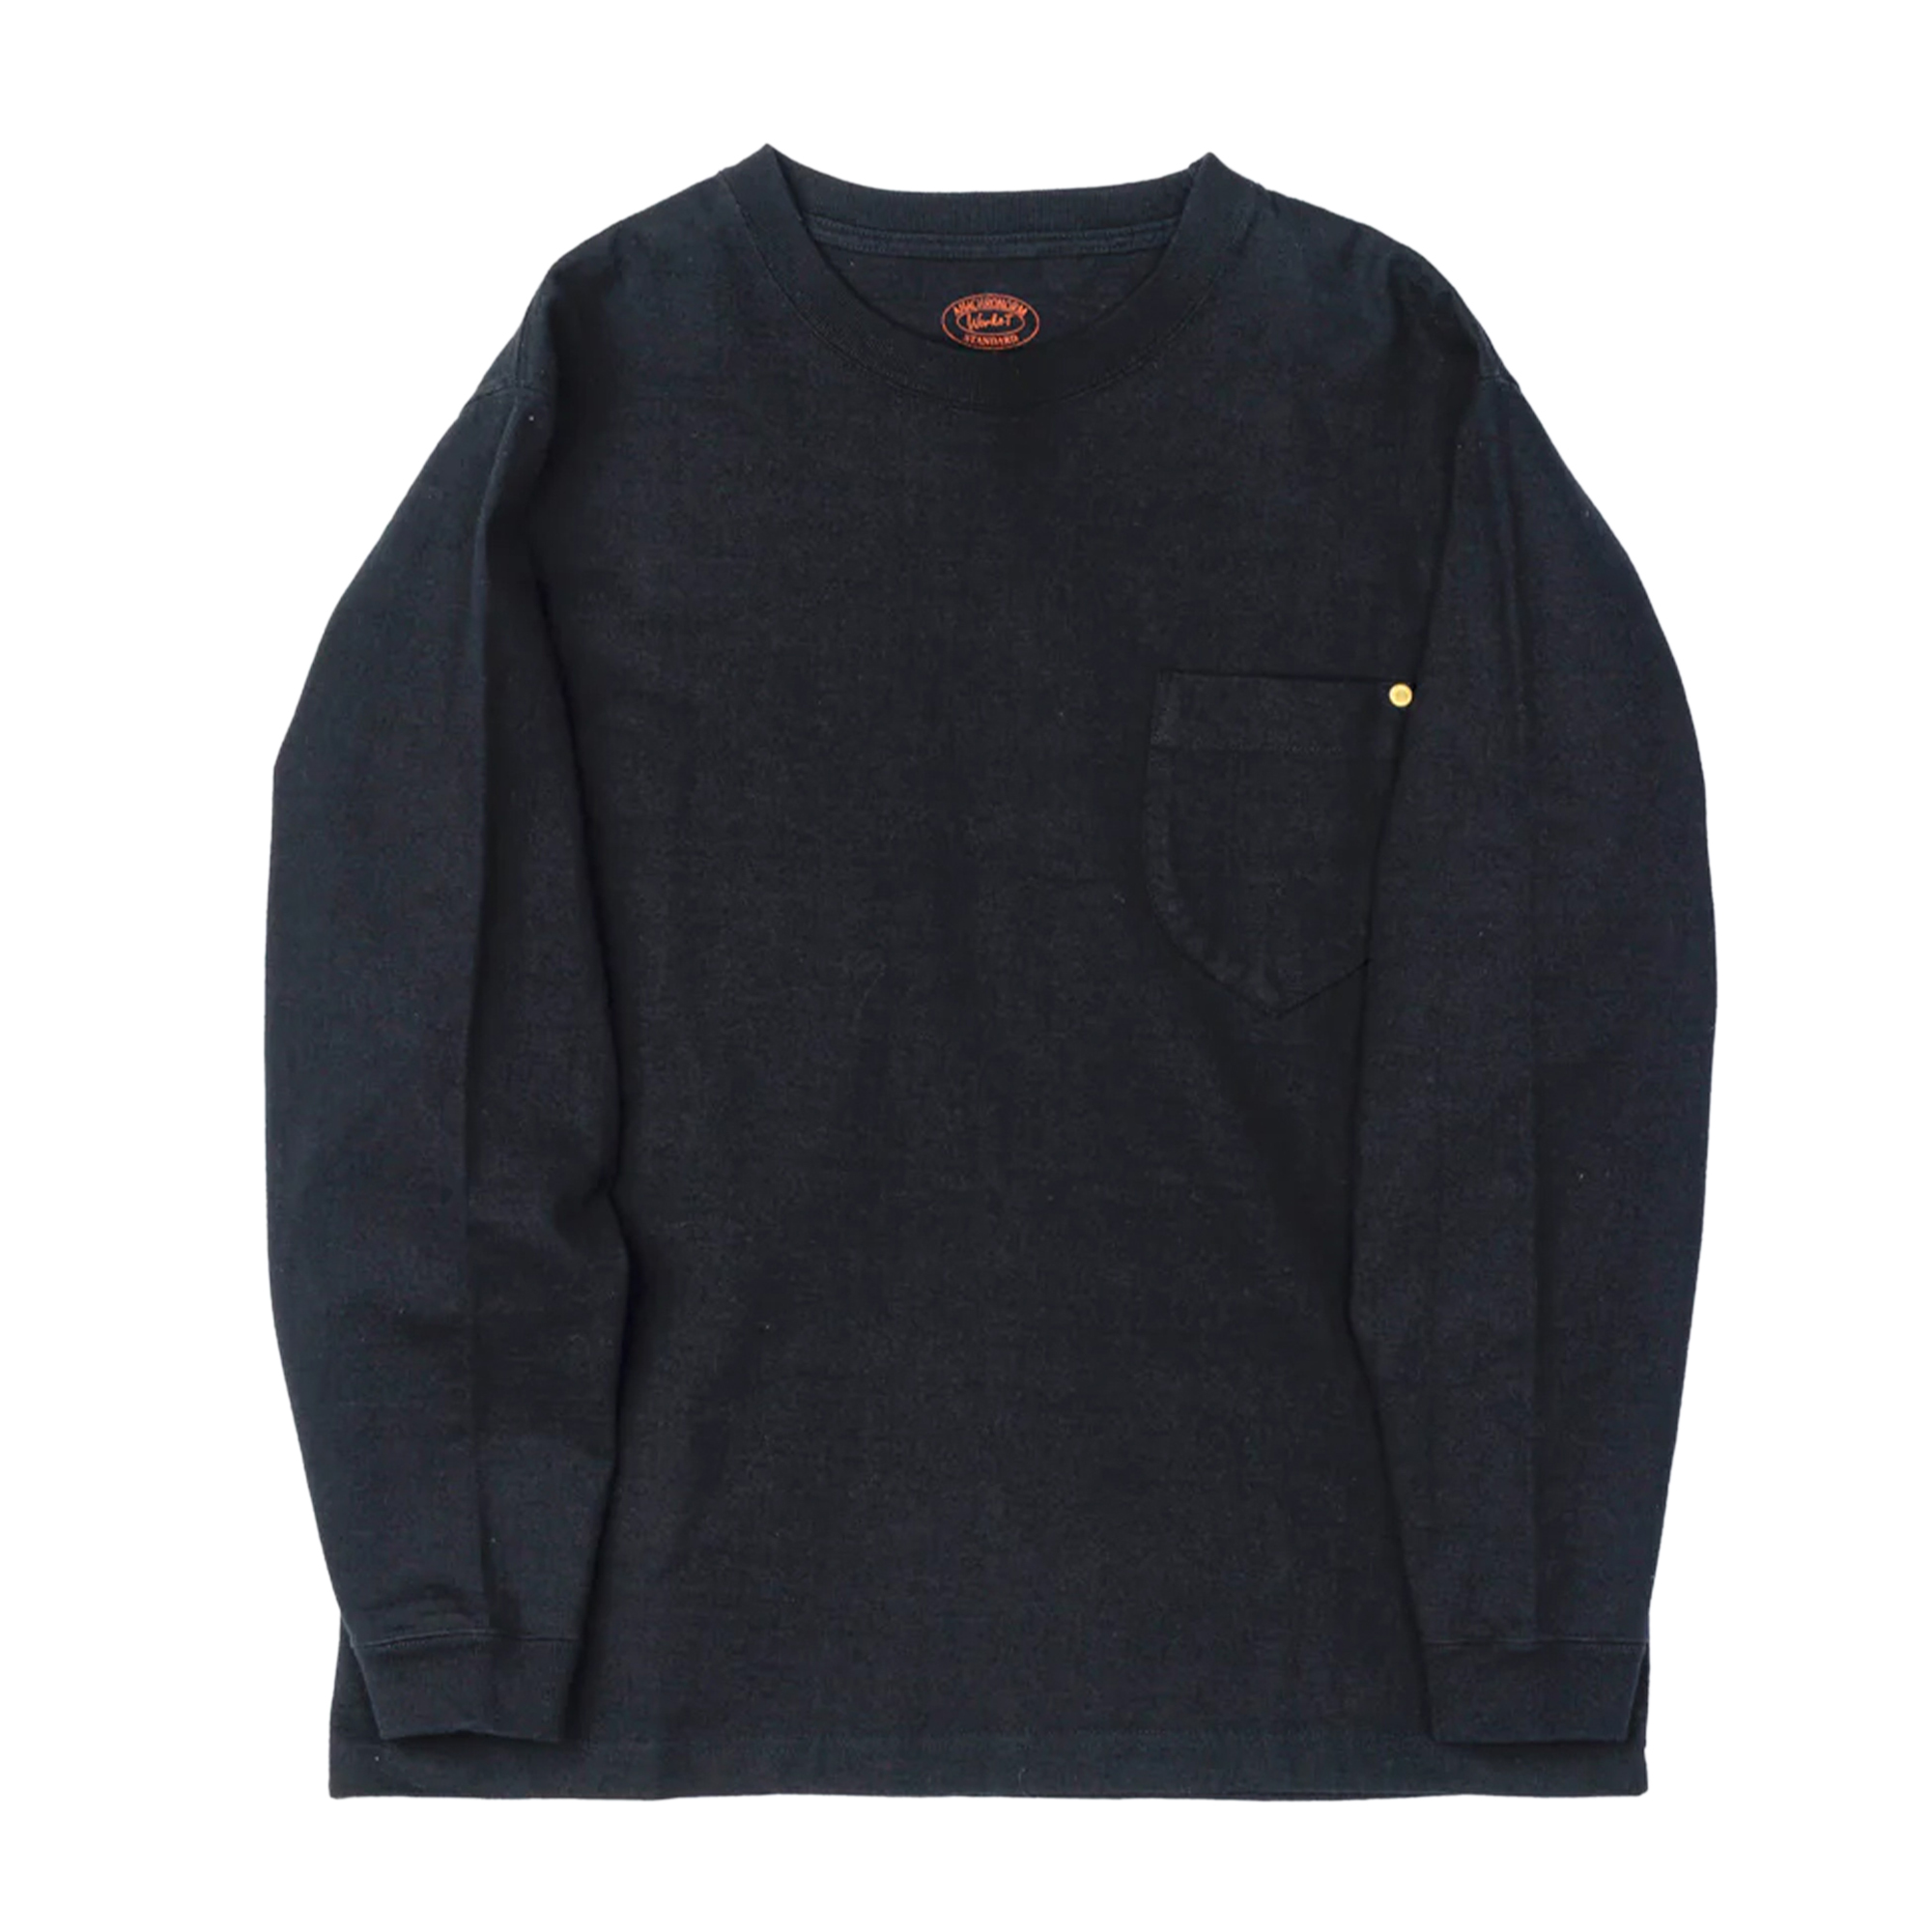 Anachronorm - Standard Heavy Weight L/S T-S (Black)